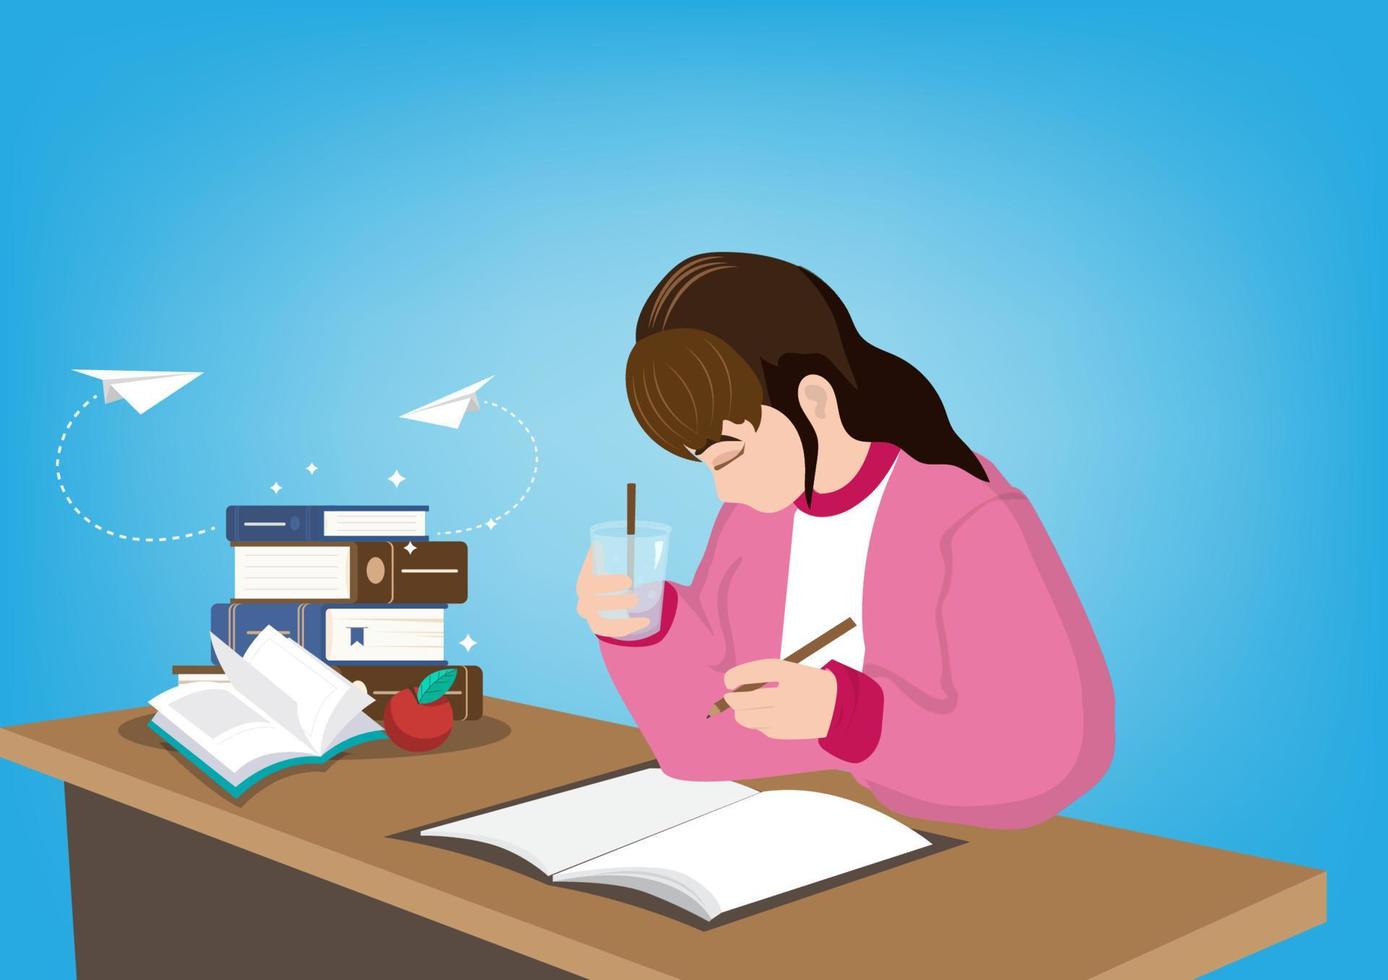 girl doing homework and reading for exams with intention cute female character images. Flat style cartoon illustration vector